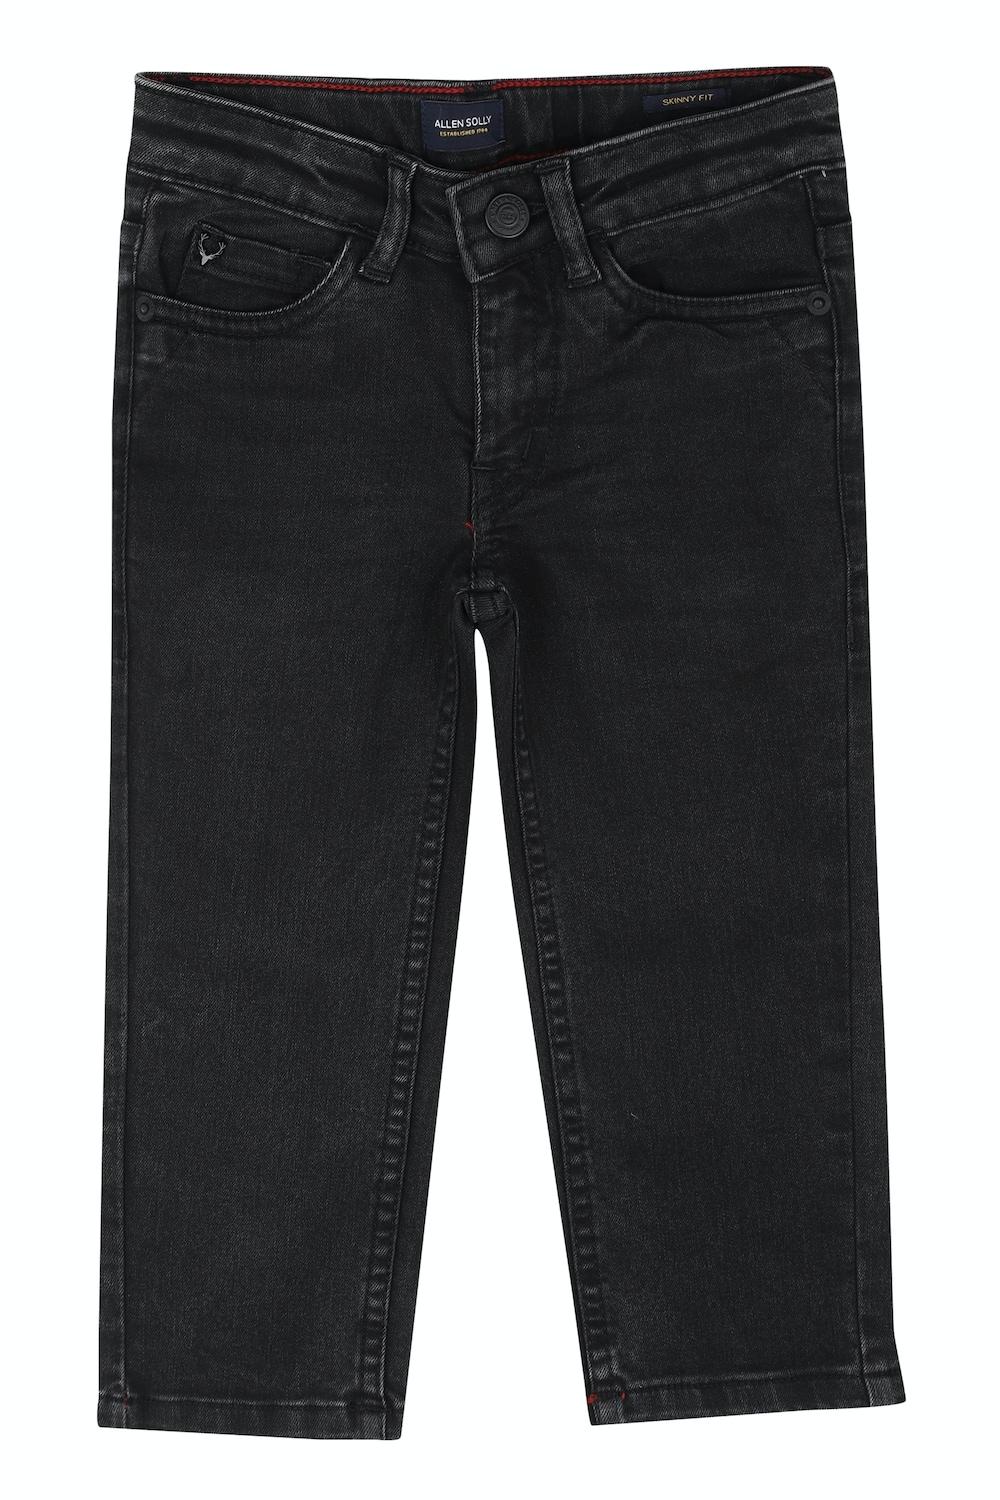 Black Skinny Fit Jeans For Boys By Allen Solly